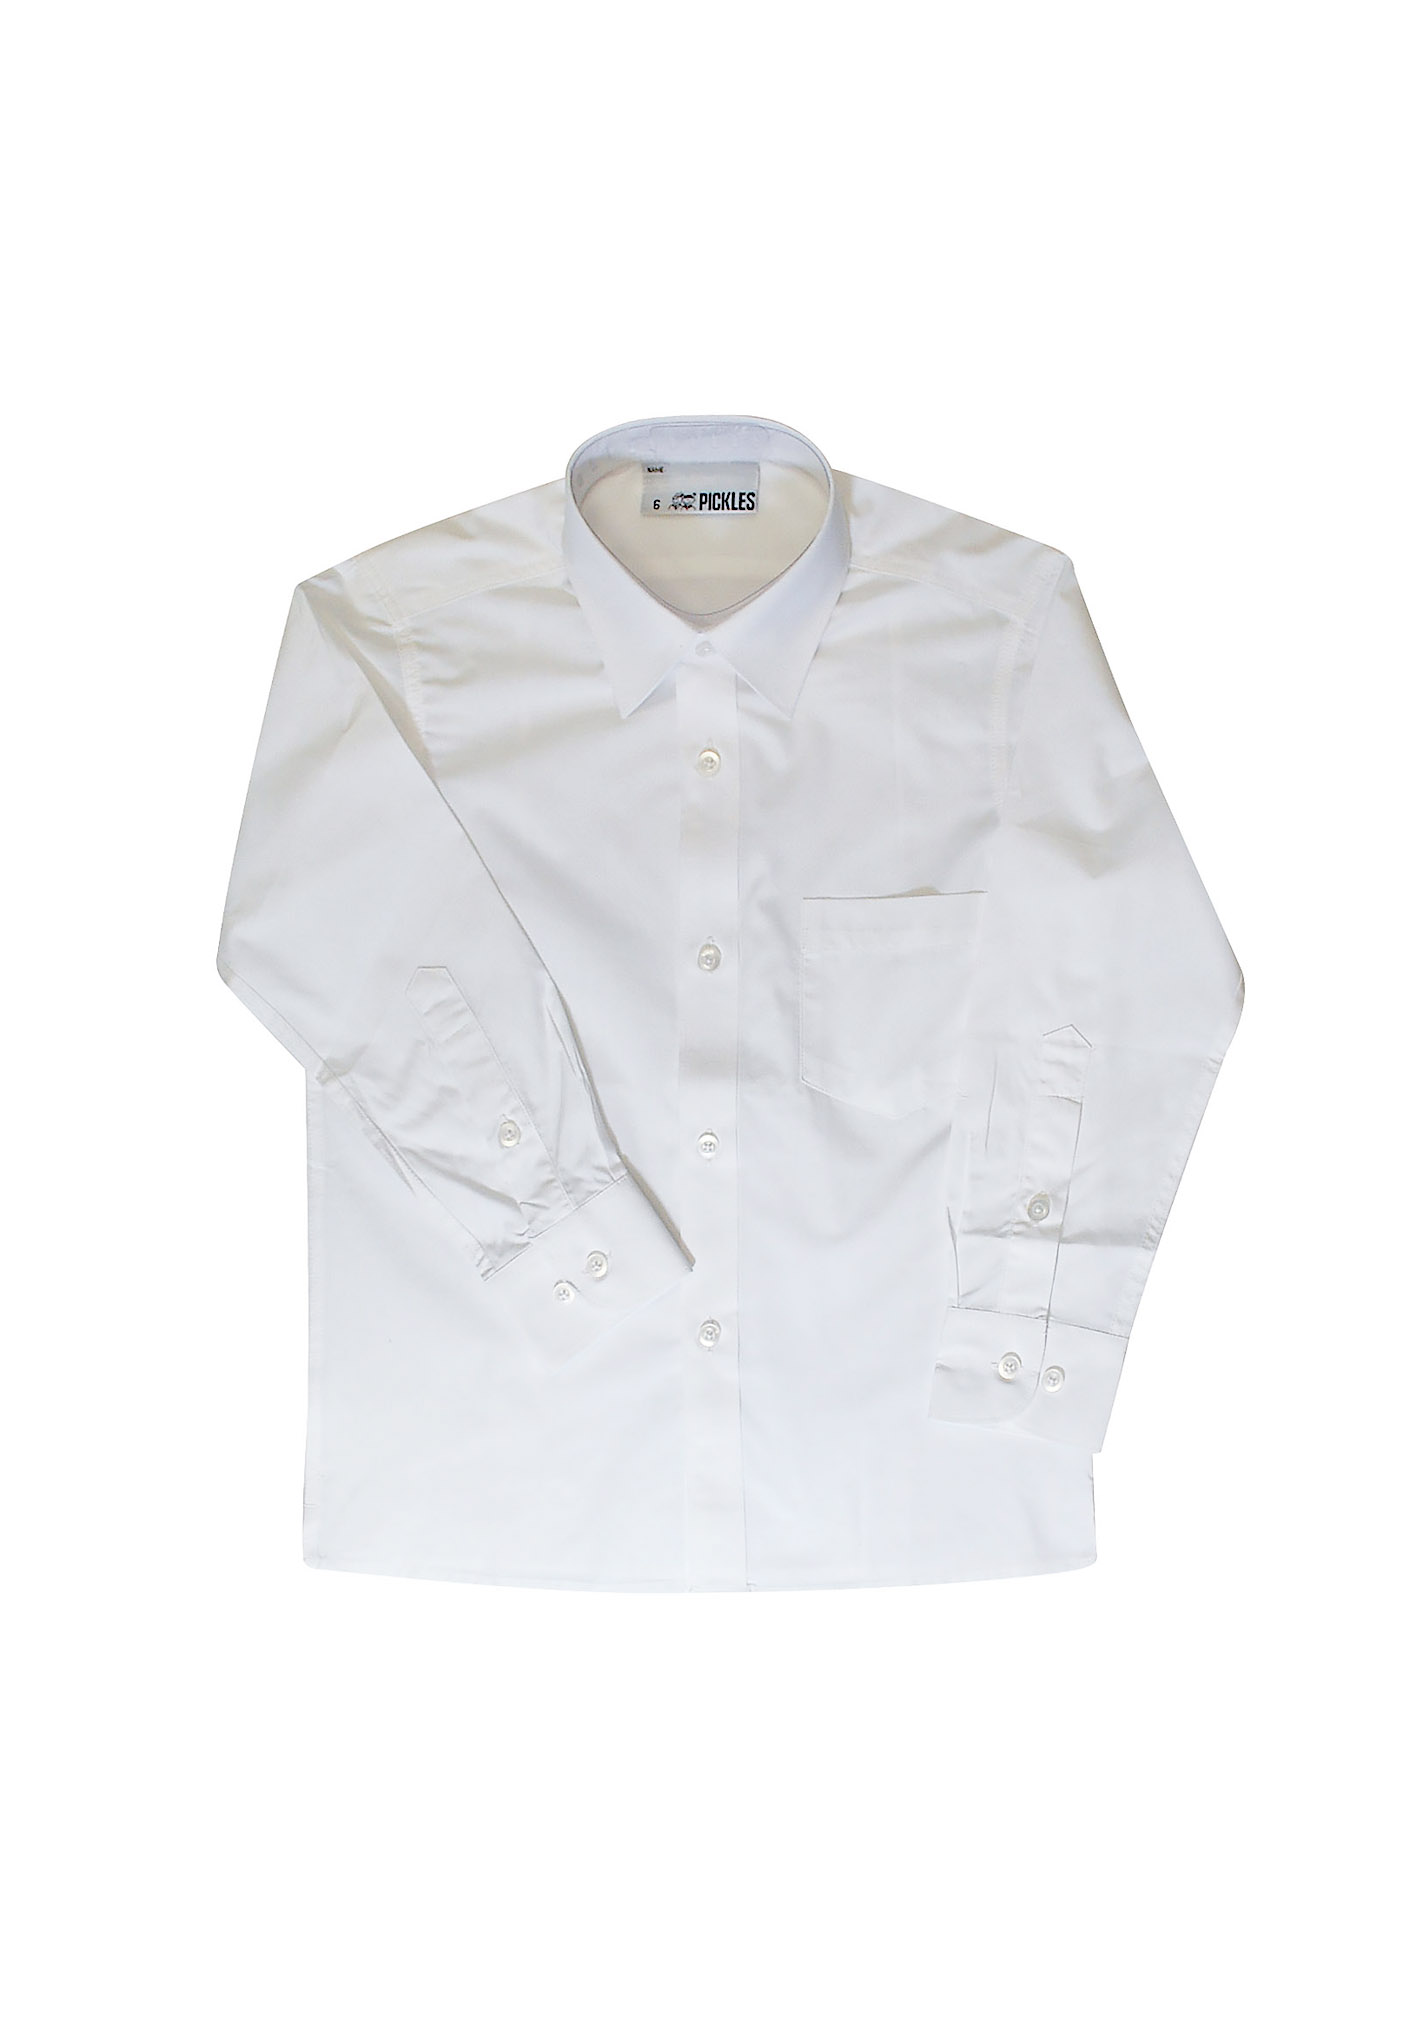 St Cecilia's Girls Long Sleeve White Tie Collar Shirt | Shop at Pickles ...